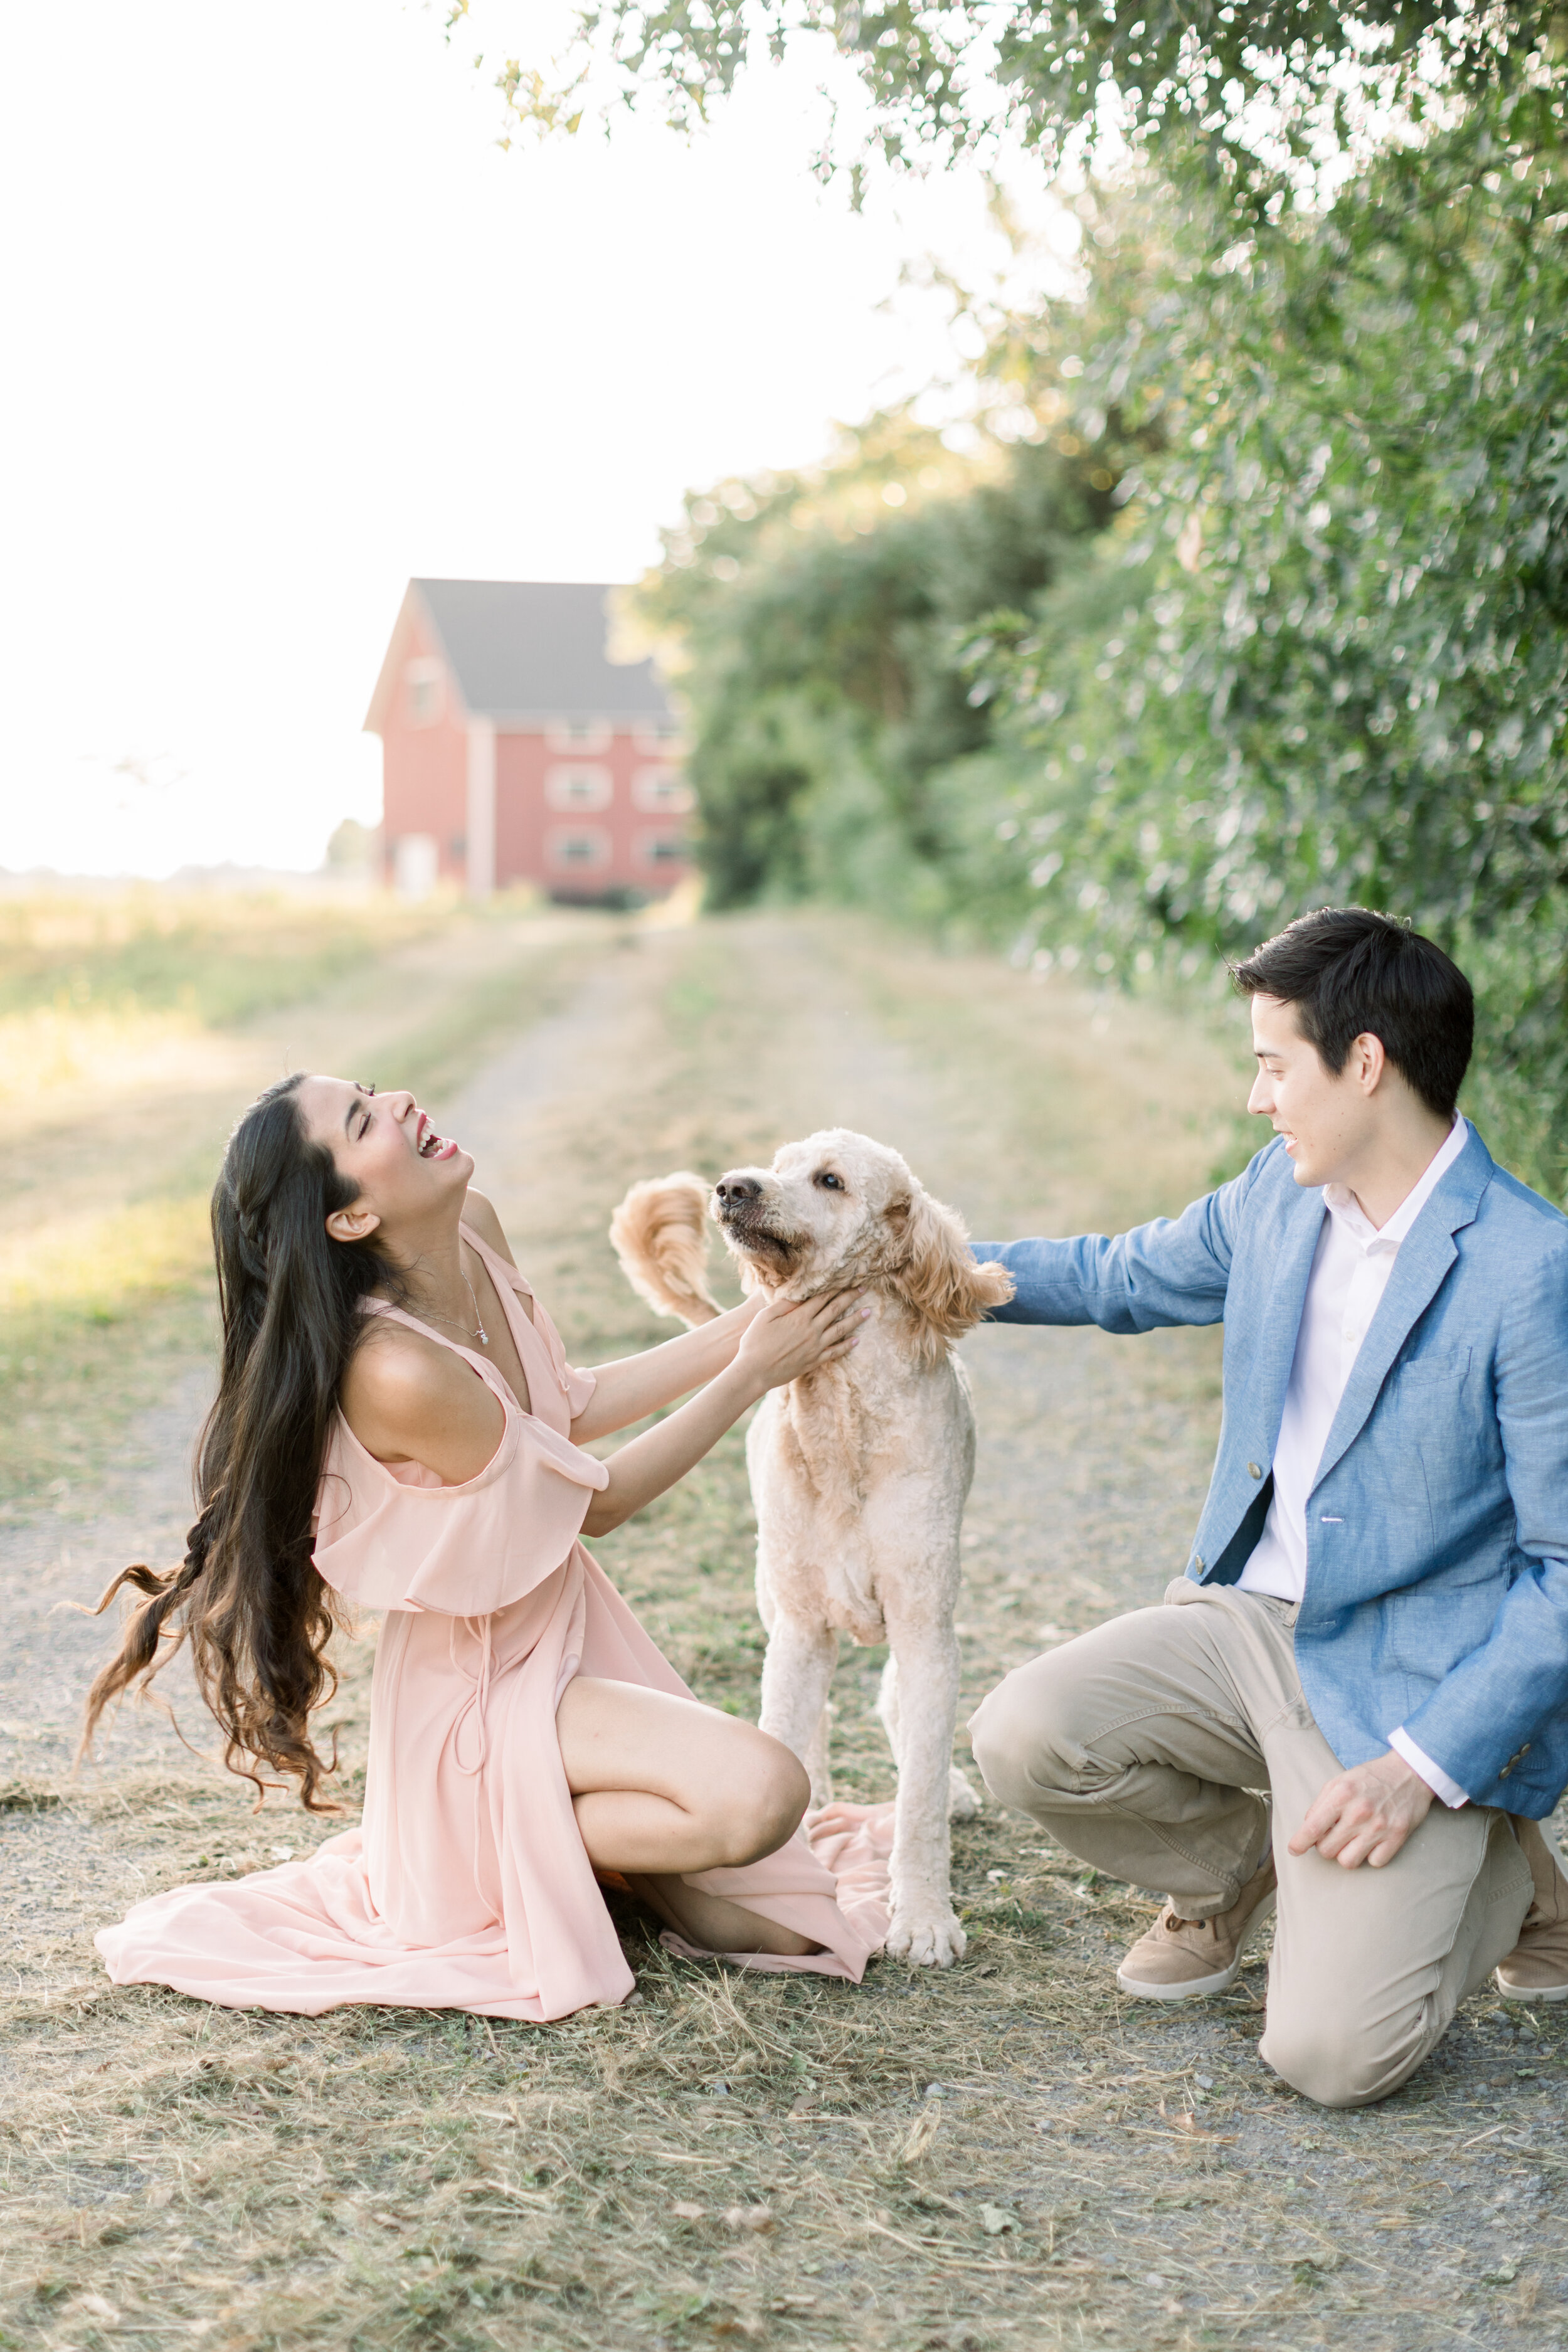  Beautiful couple taking engagements photographs with their pet dog in Ottawa, ON by Chelsea Mason Photography. aboretum photoshoot locations outdoor locations for photoshoots in ottawa engagement couple outdoor photo locations in ottawa couple outfi